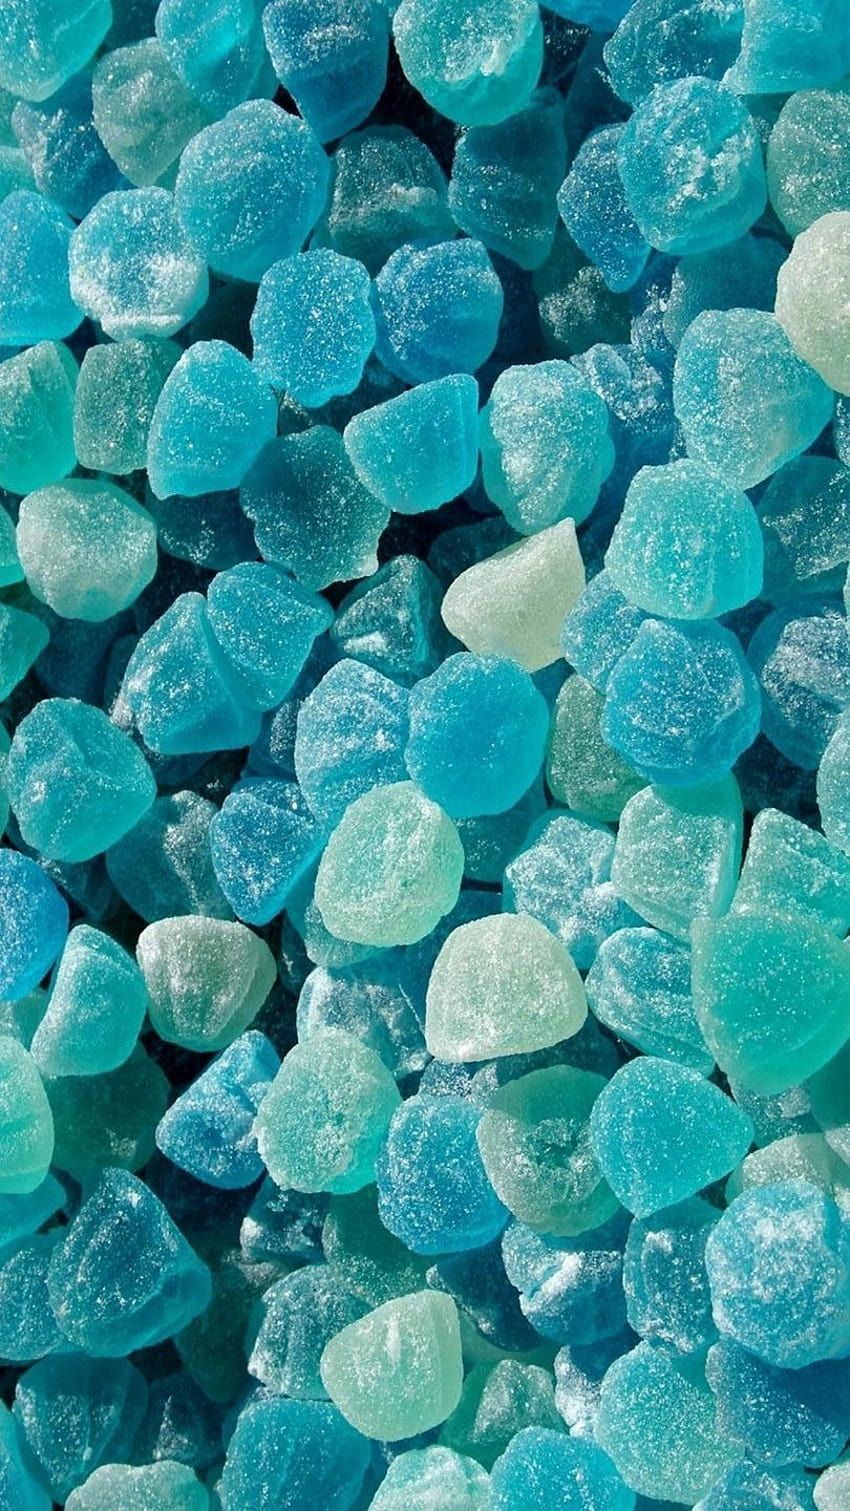 A close up of blue rocks on the ground - Cyan